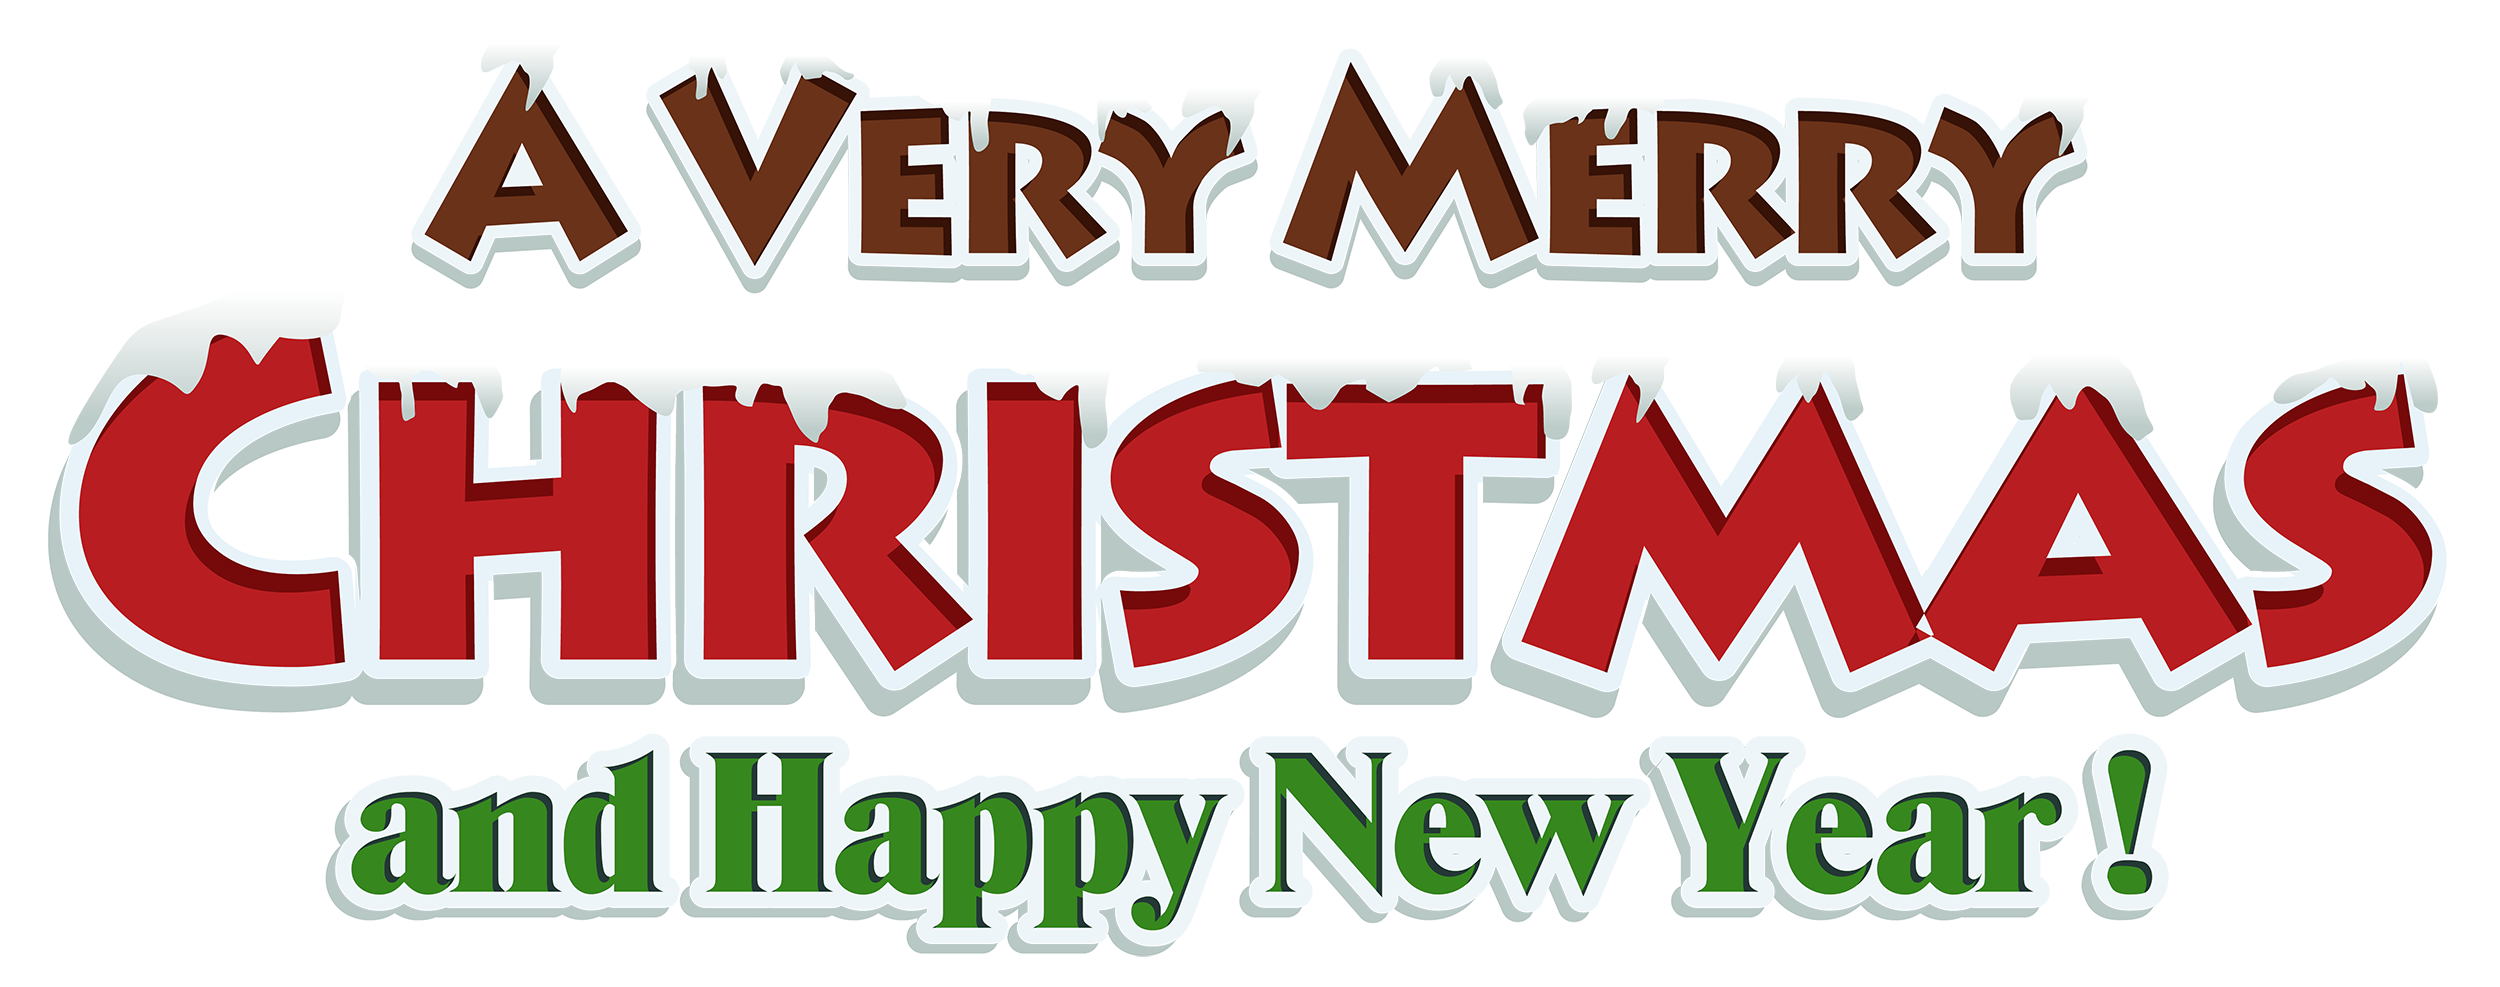 Merry Christmas Text Design Ideas PNG